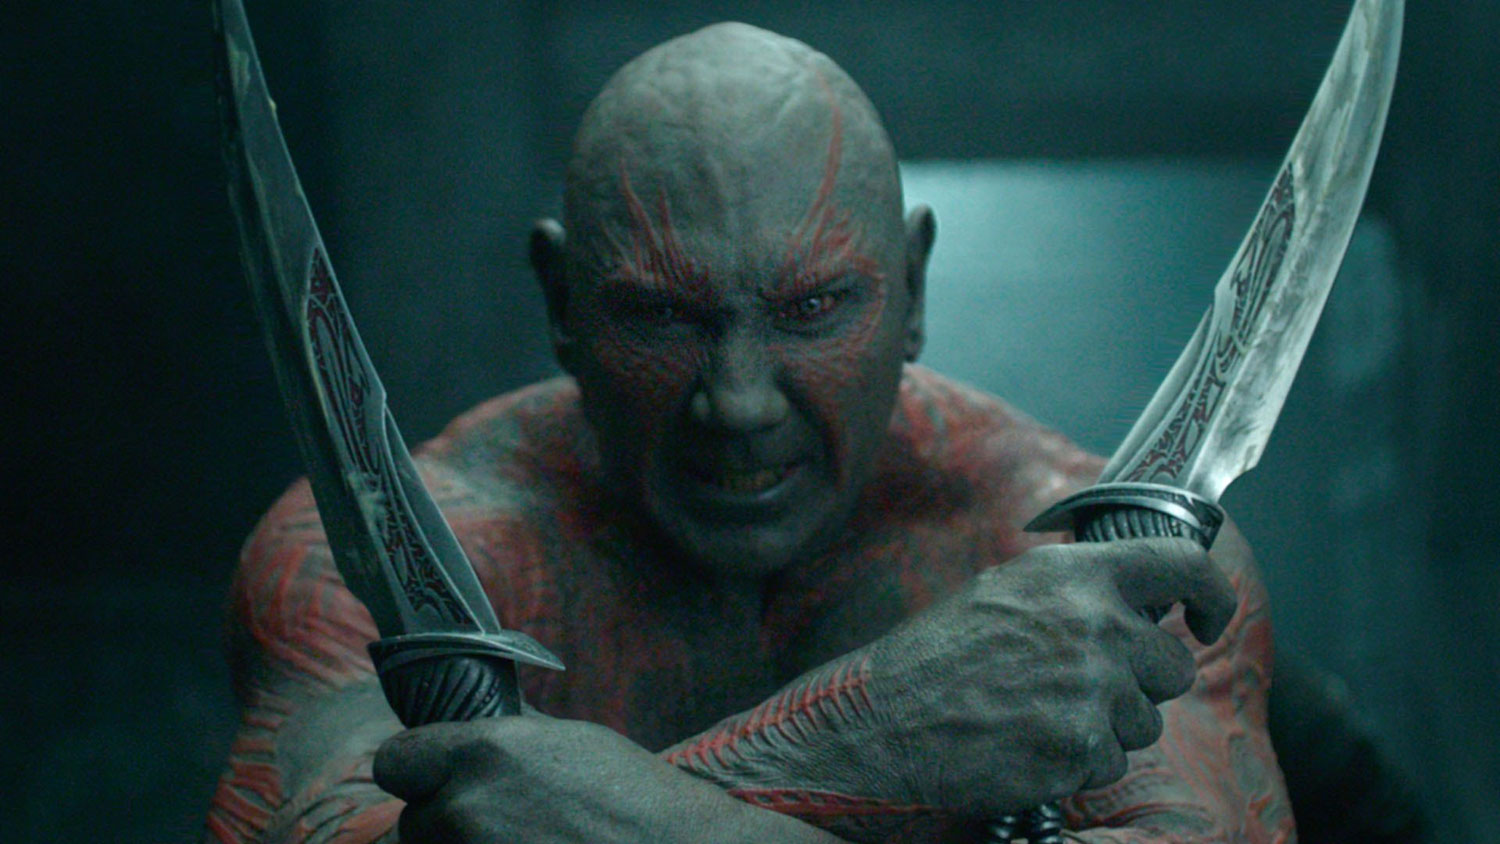 Better known by his wrestling stage name “Batista,” Dave Bautista entered into the world of MMA after leaving the WWE. He became a purple belt in Brazilian Jiu-Jitsu. He’s now in the world of acting, starring in some major motion pictures. He played Drax the Destroyer in 2014’s Guardian’s of the Galaxy and will appear […]